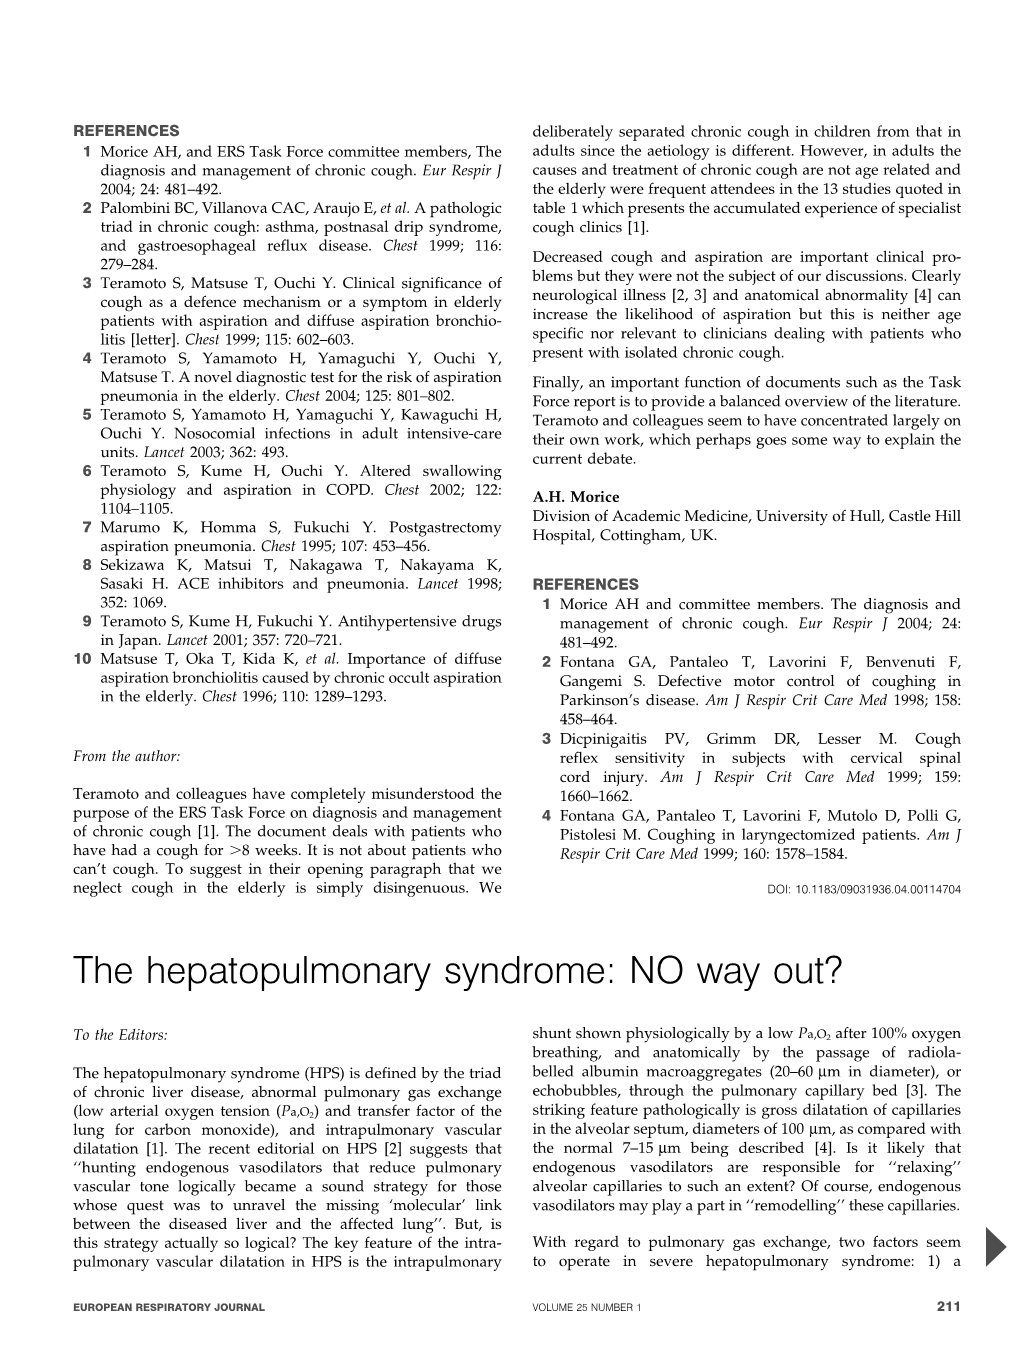 The Hepatopulmonary Syndrome: NO Way Out?